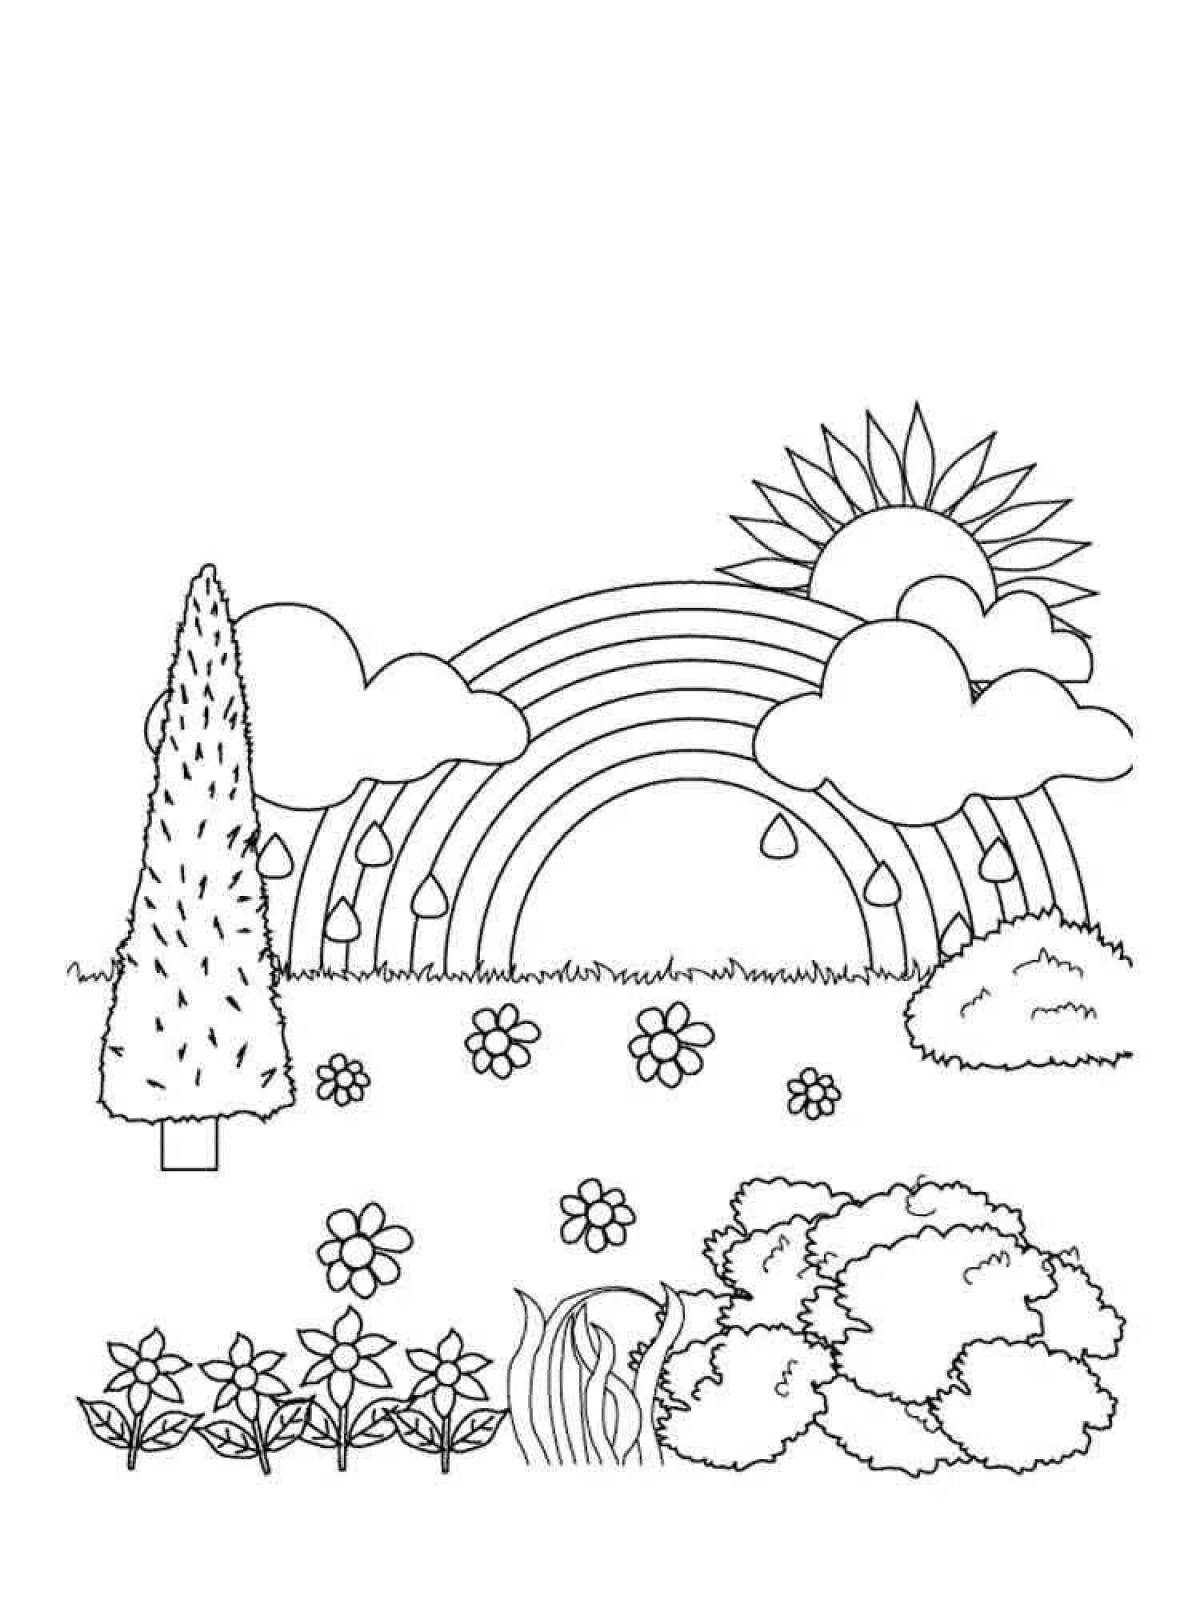 Inviting seal coloring page